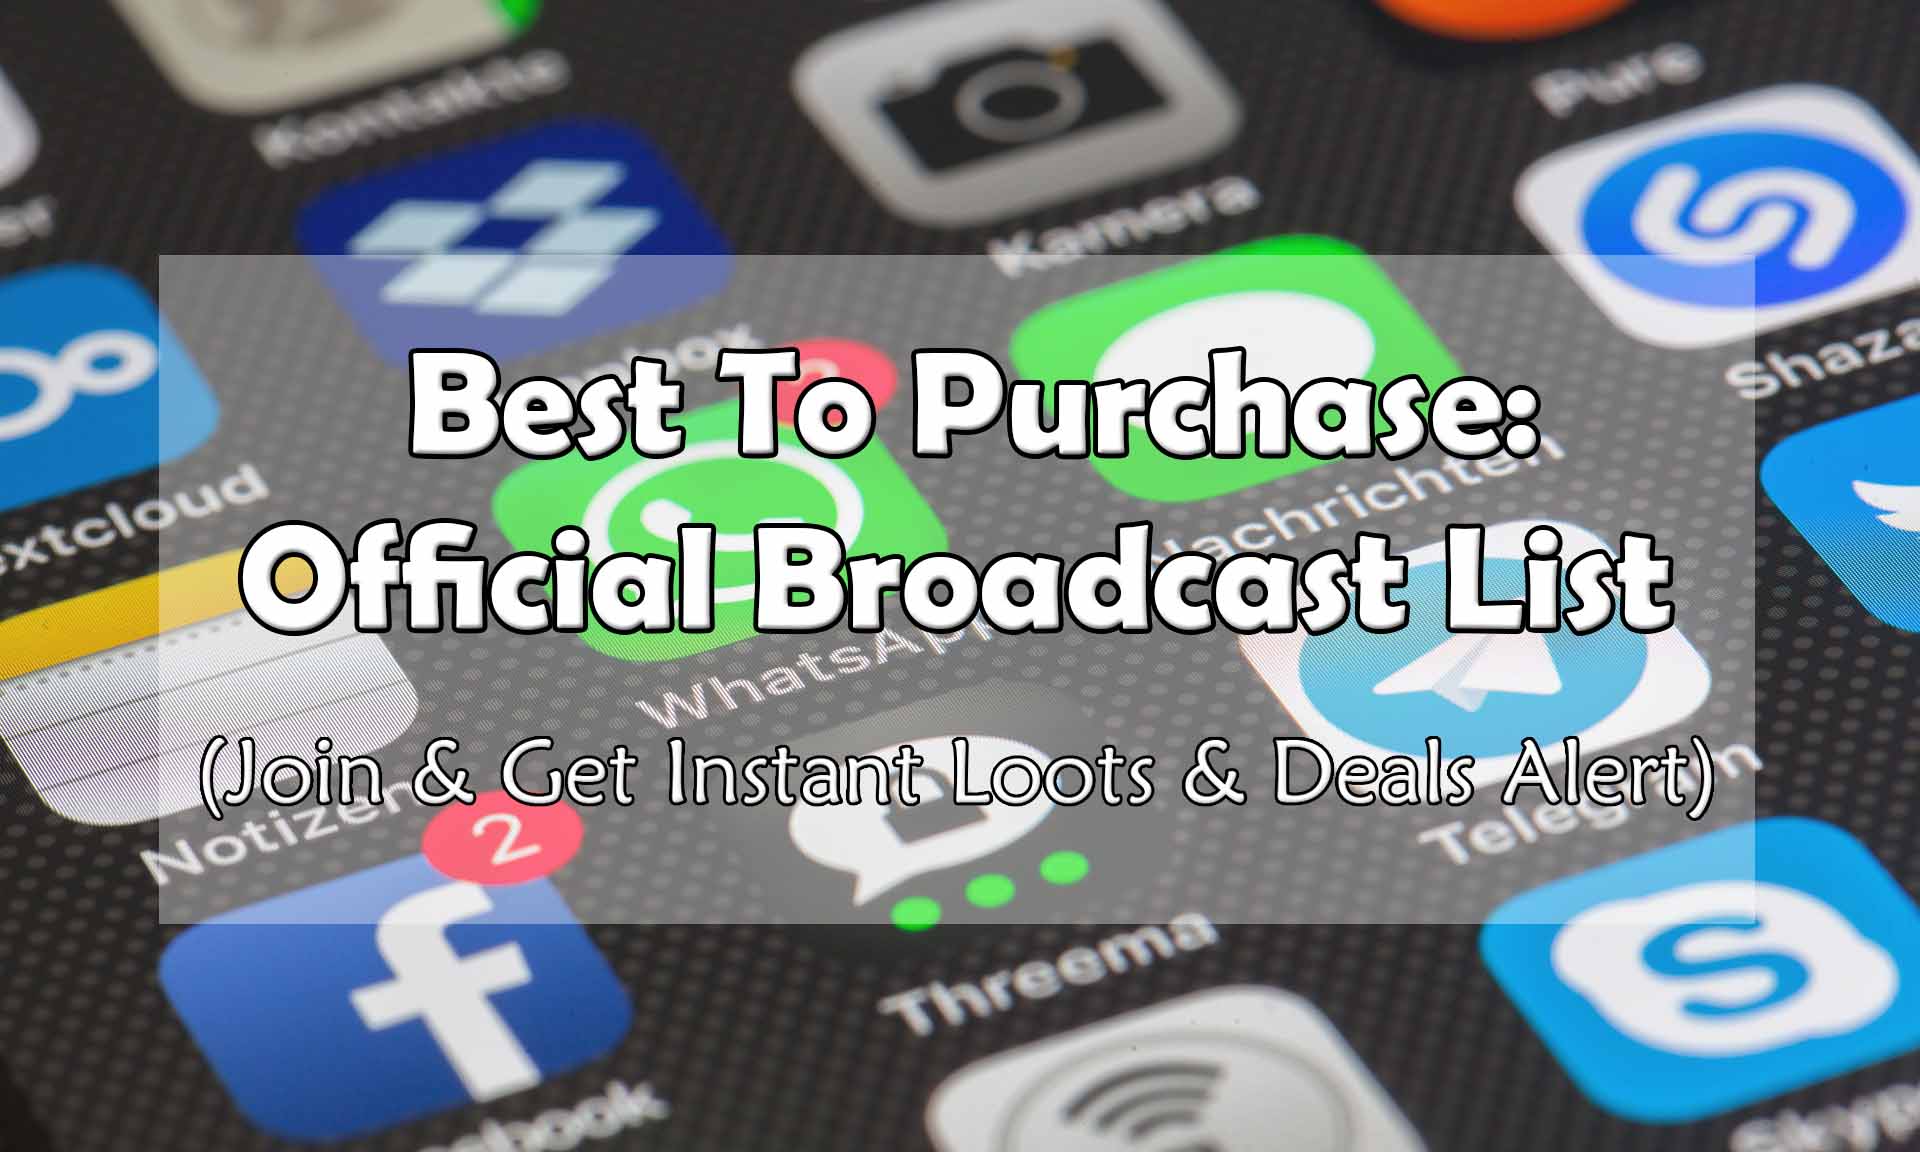 Best To Purchase Broadcast List